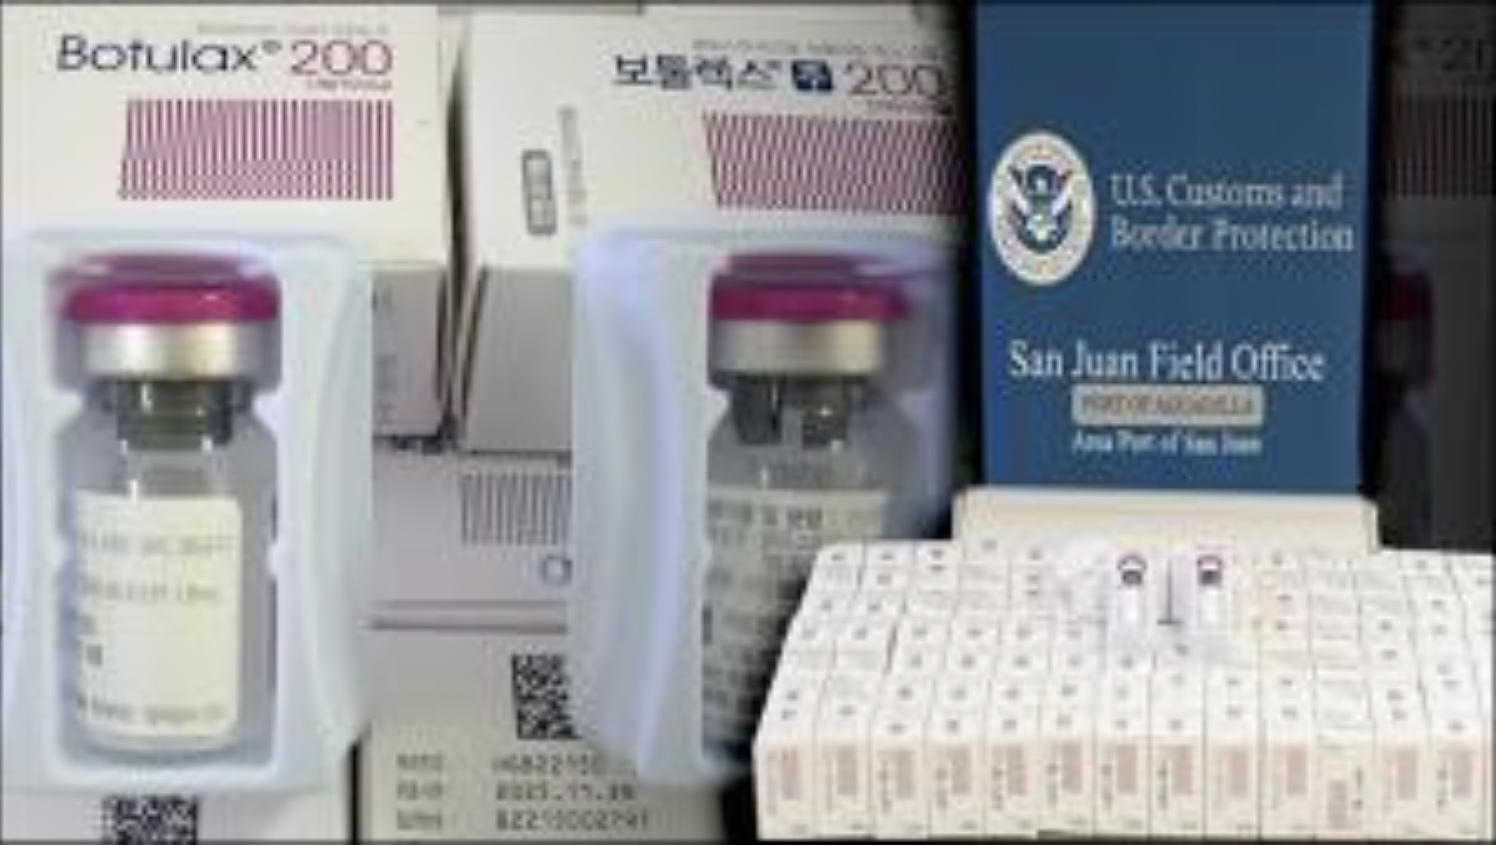 Counterfeit Botox seized by CBP in San Juan, Puerto Rico in July 2023